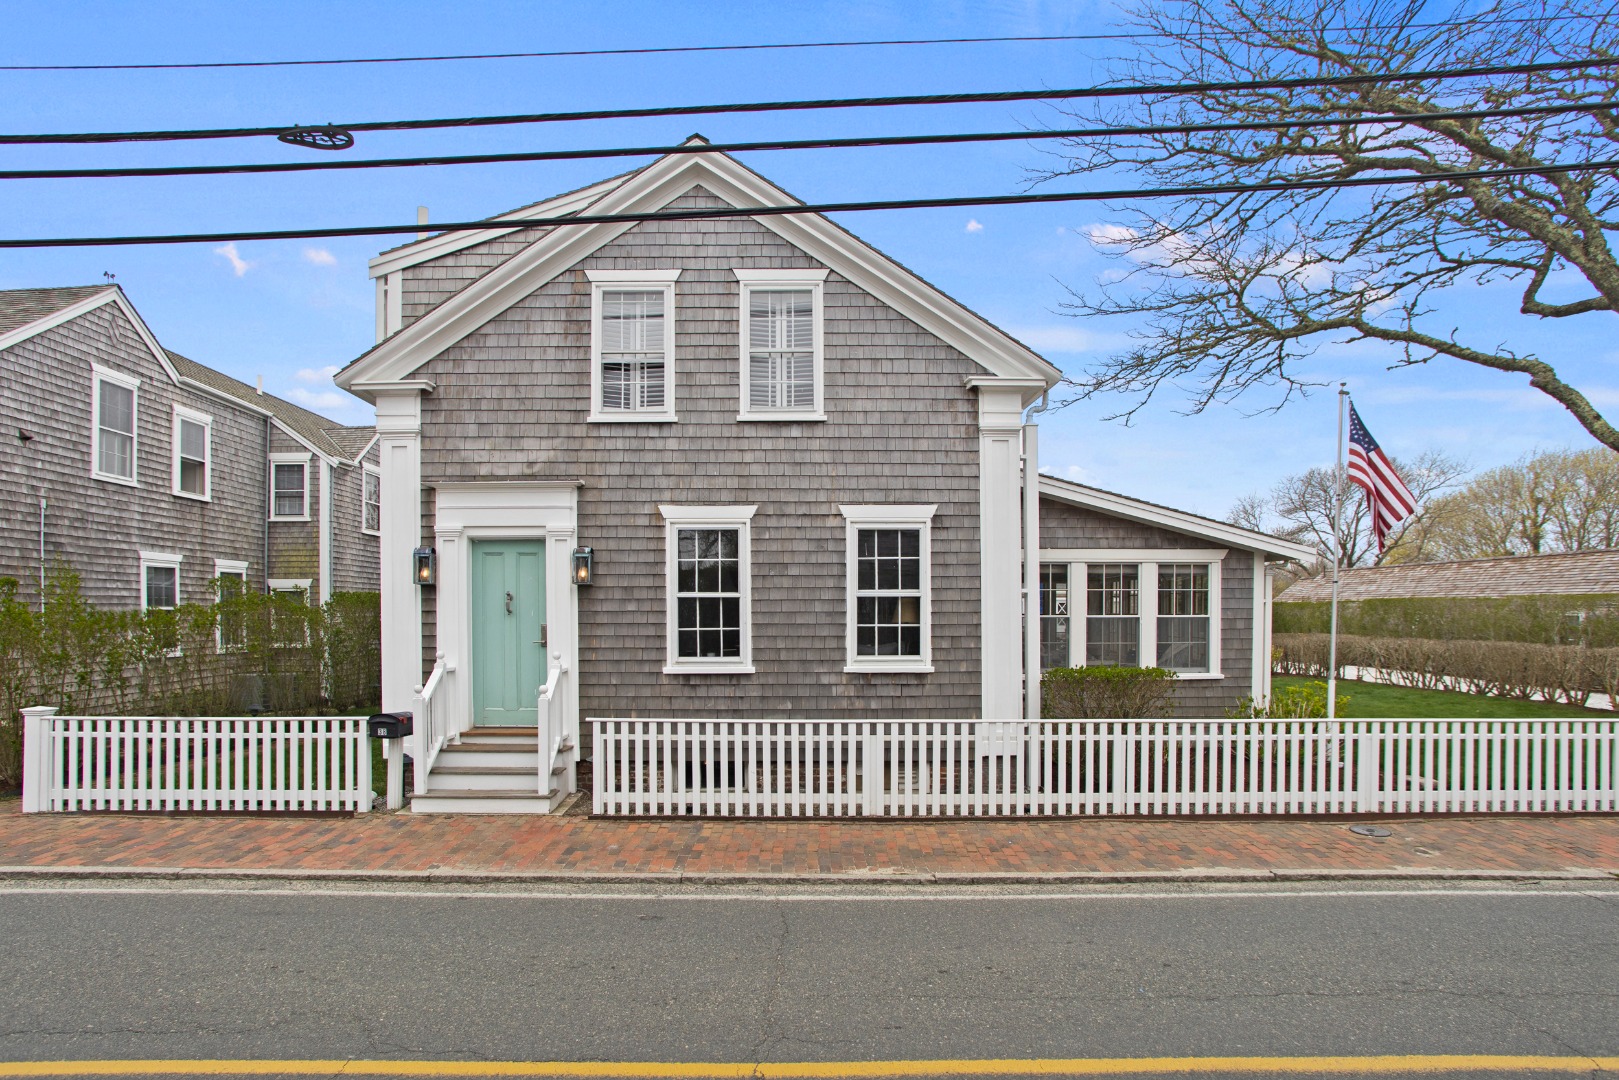 38 and 40 Cliff Road Nantucket